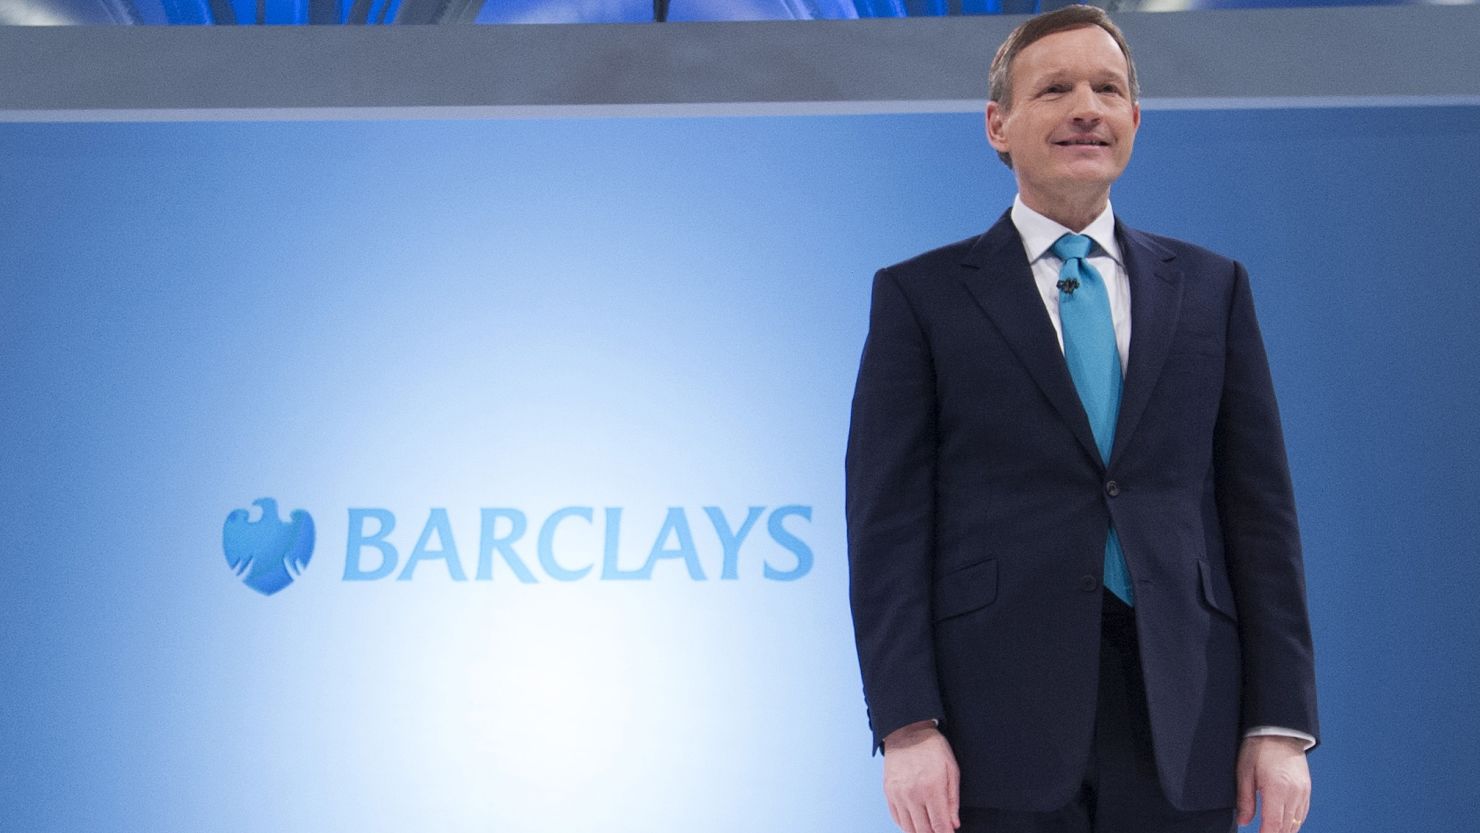 Barclays CEO Jenkins is different. He has a vision of a more ethical and socially responsible bank, writes Cooper.